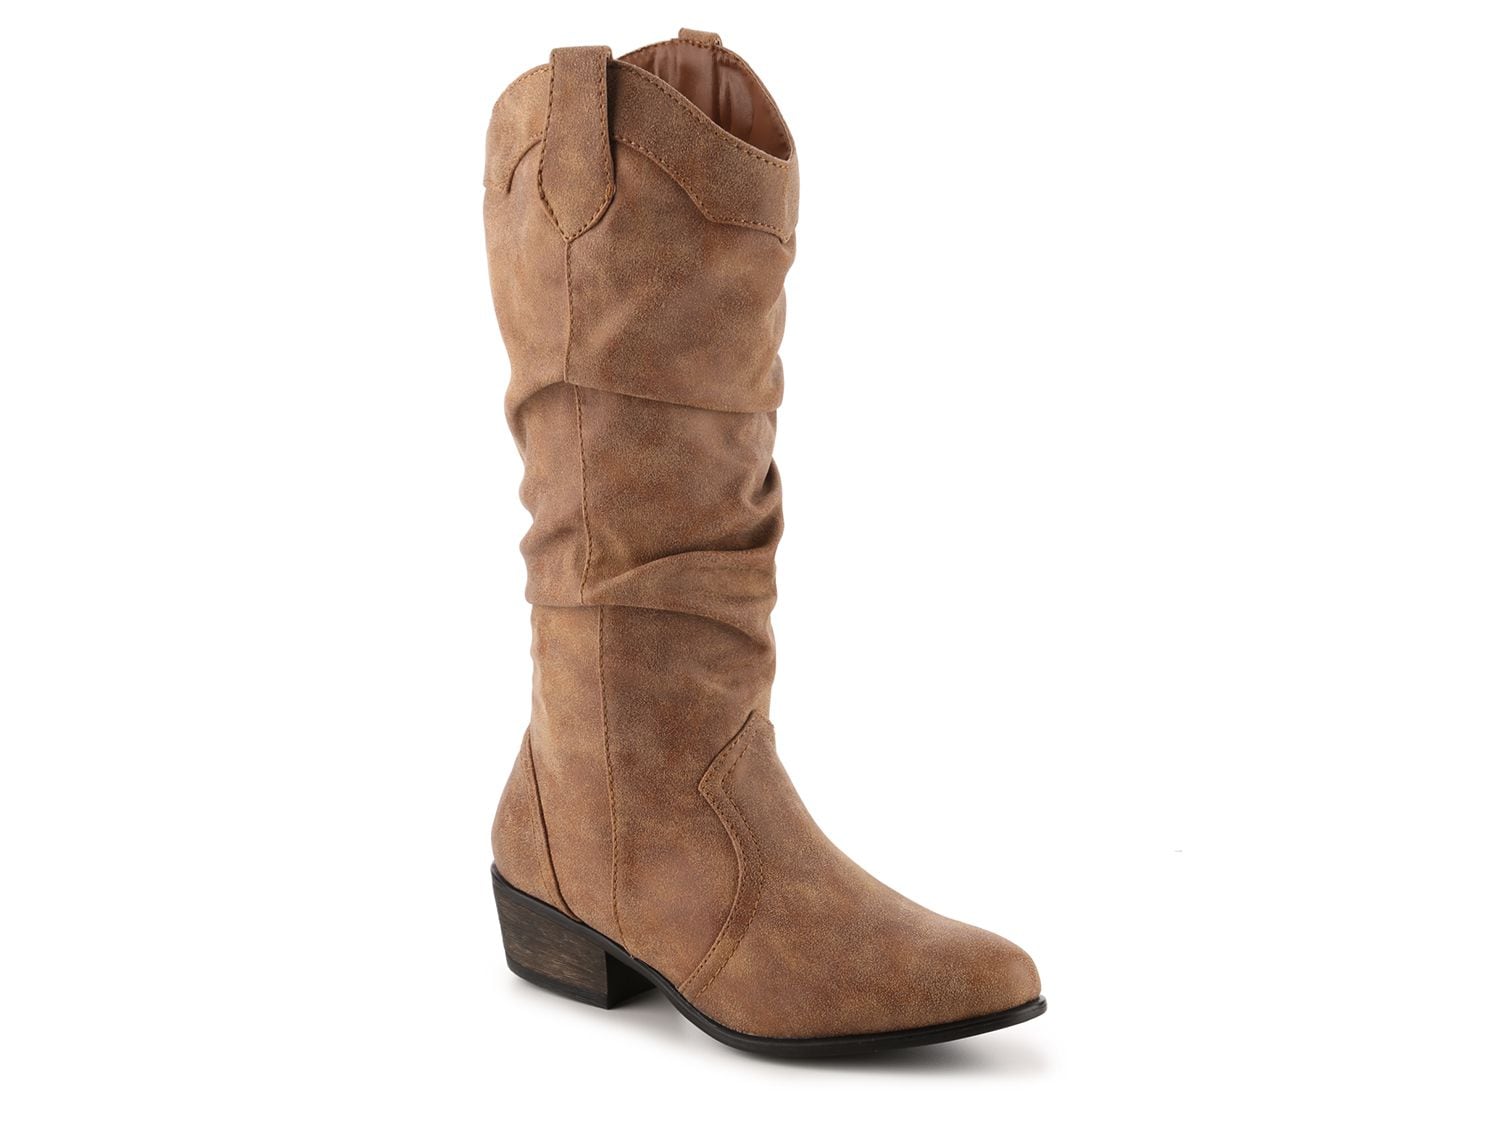 Journee Collection Drover Wide Calf Cowboy Boot - Free Shipping | DSW